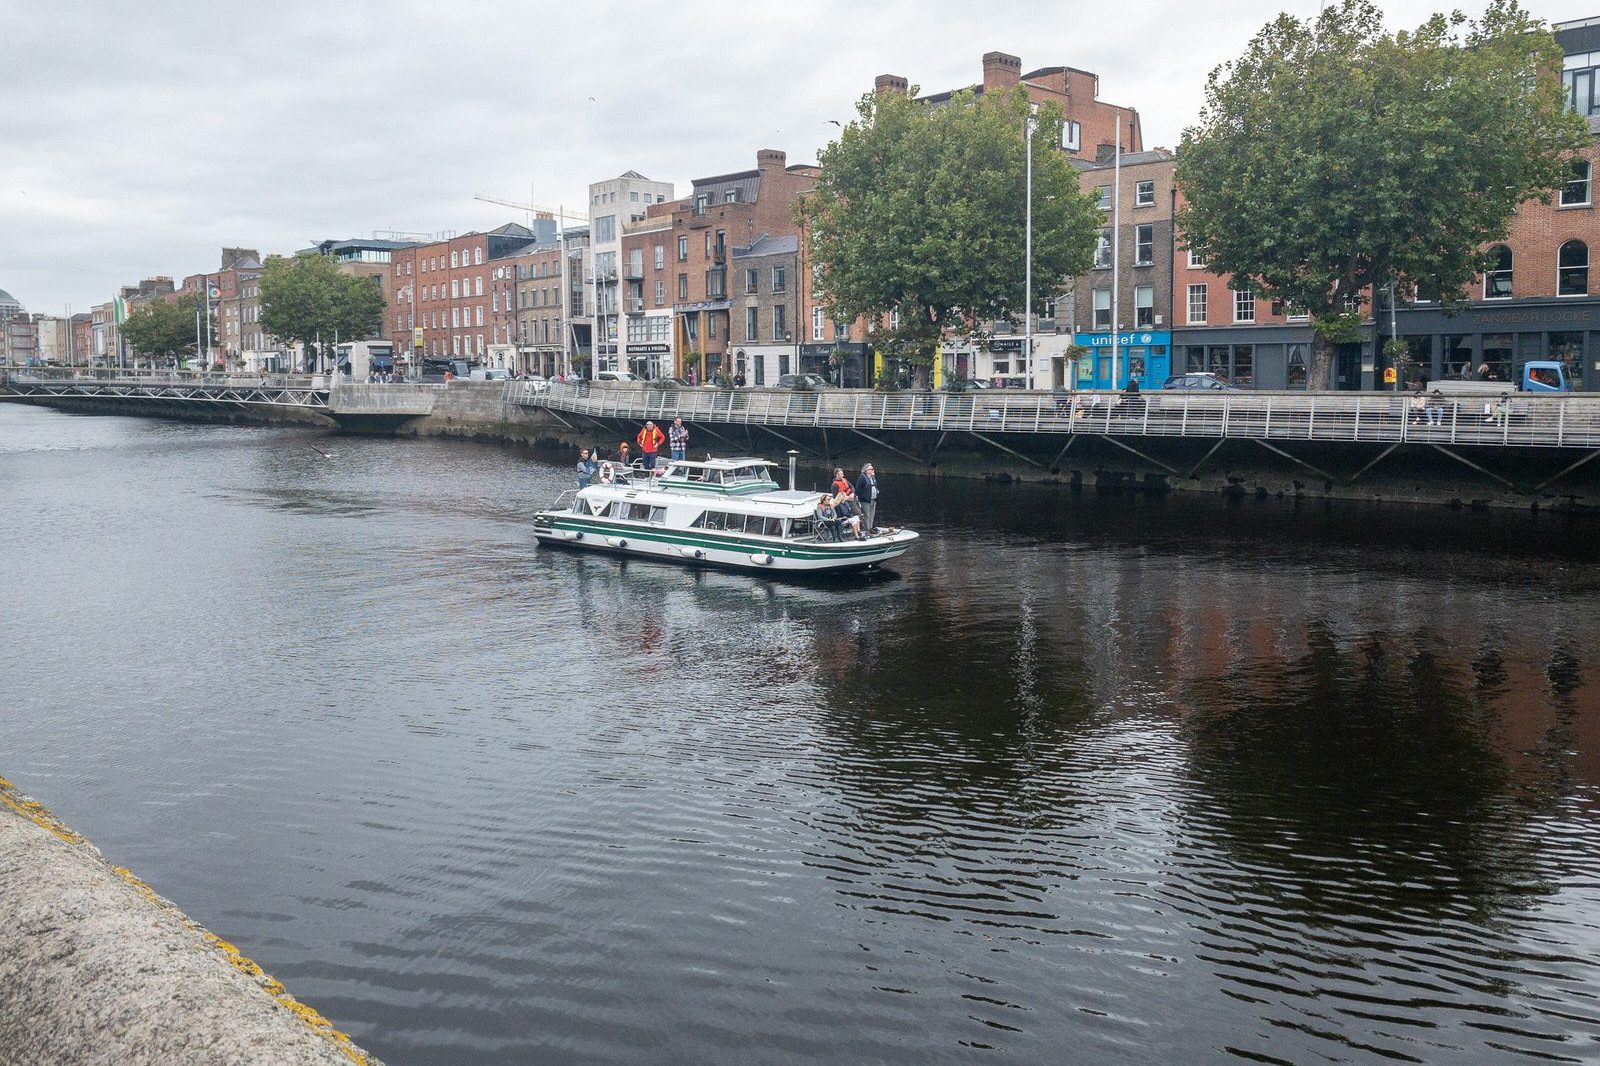 TWO BOATS AND A BARGE [SAILING DOWN THE RIVER LIFFEY] 008